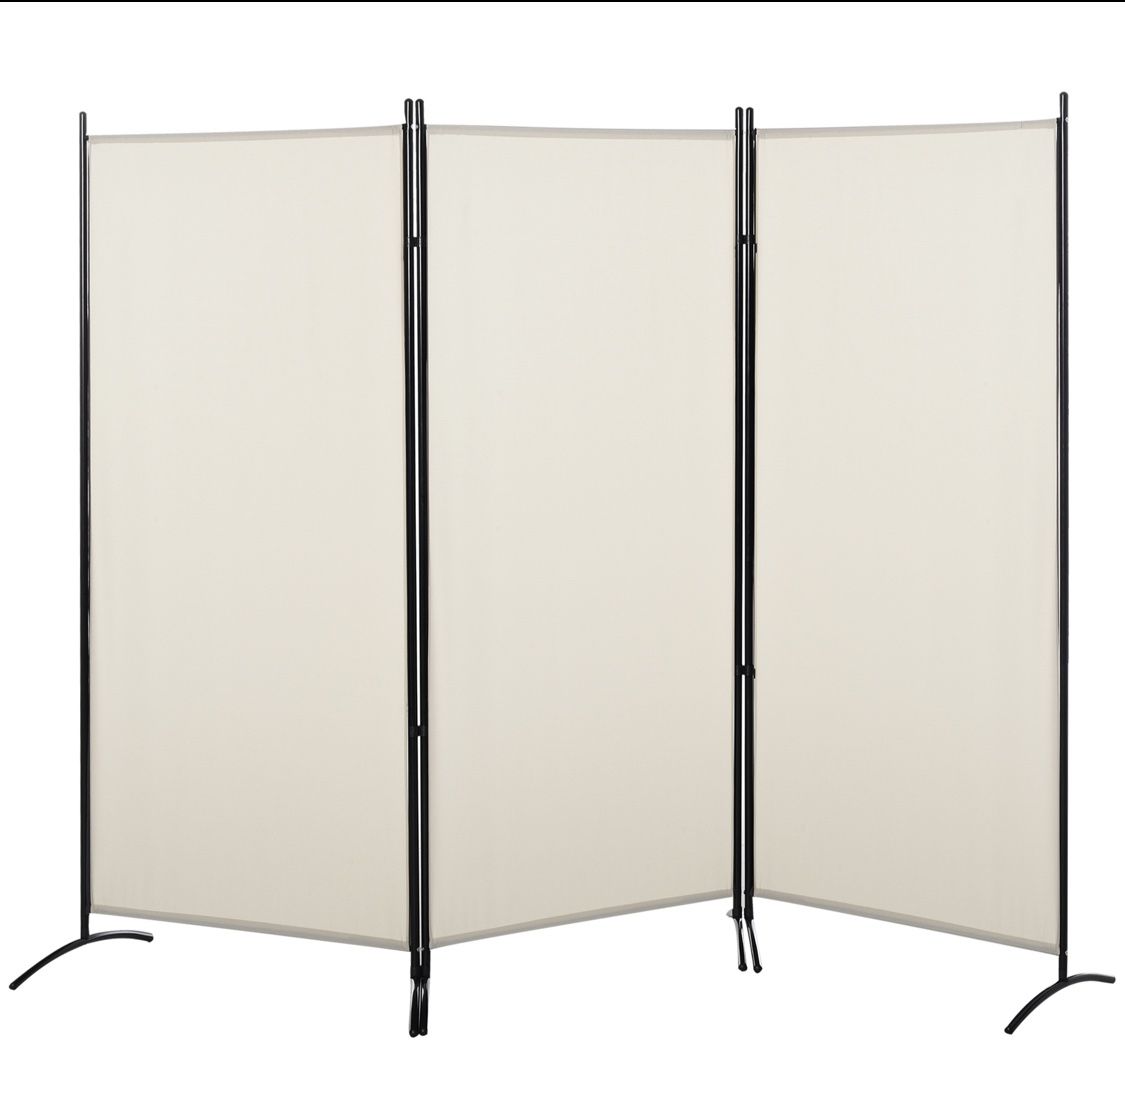 HOMCOM 3-Panel Folding Screen Room Divider Privacy Separator Partition for Indoor Bedroom Office, Outdoor Patio 100" x 72" Beige